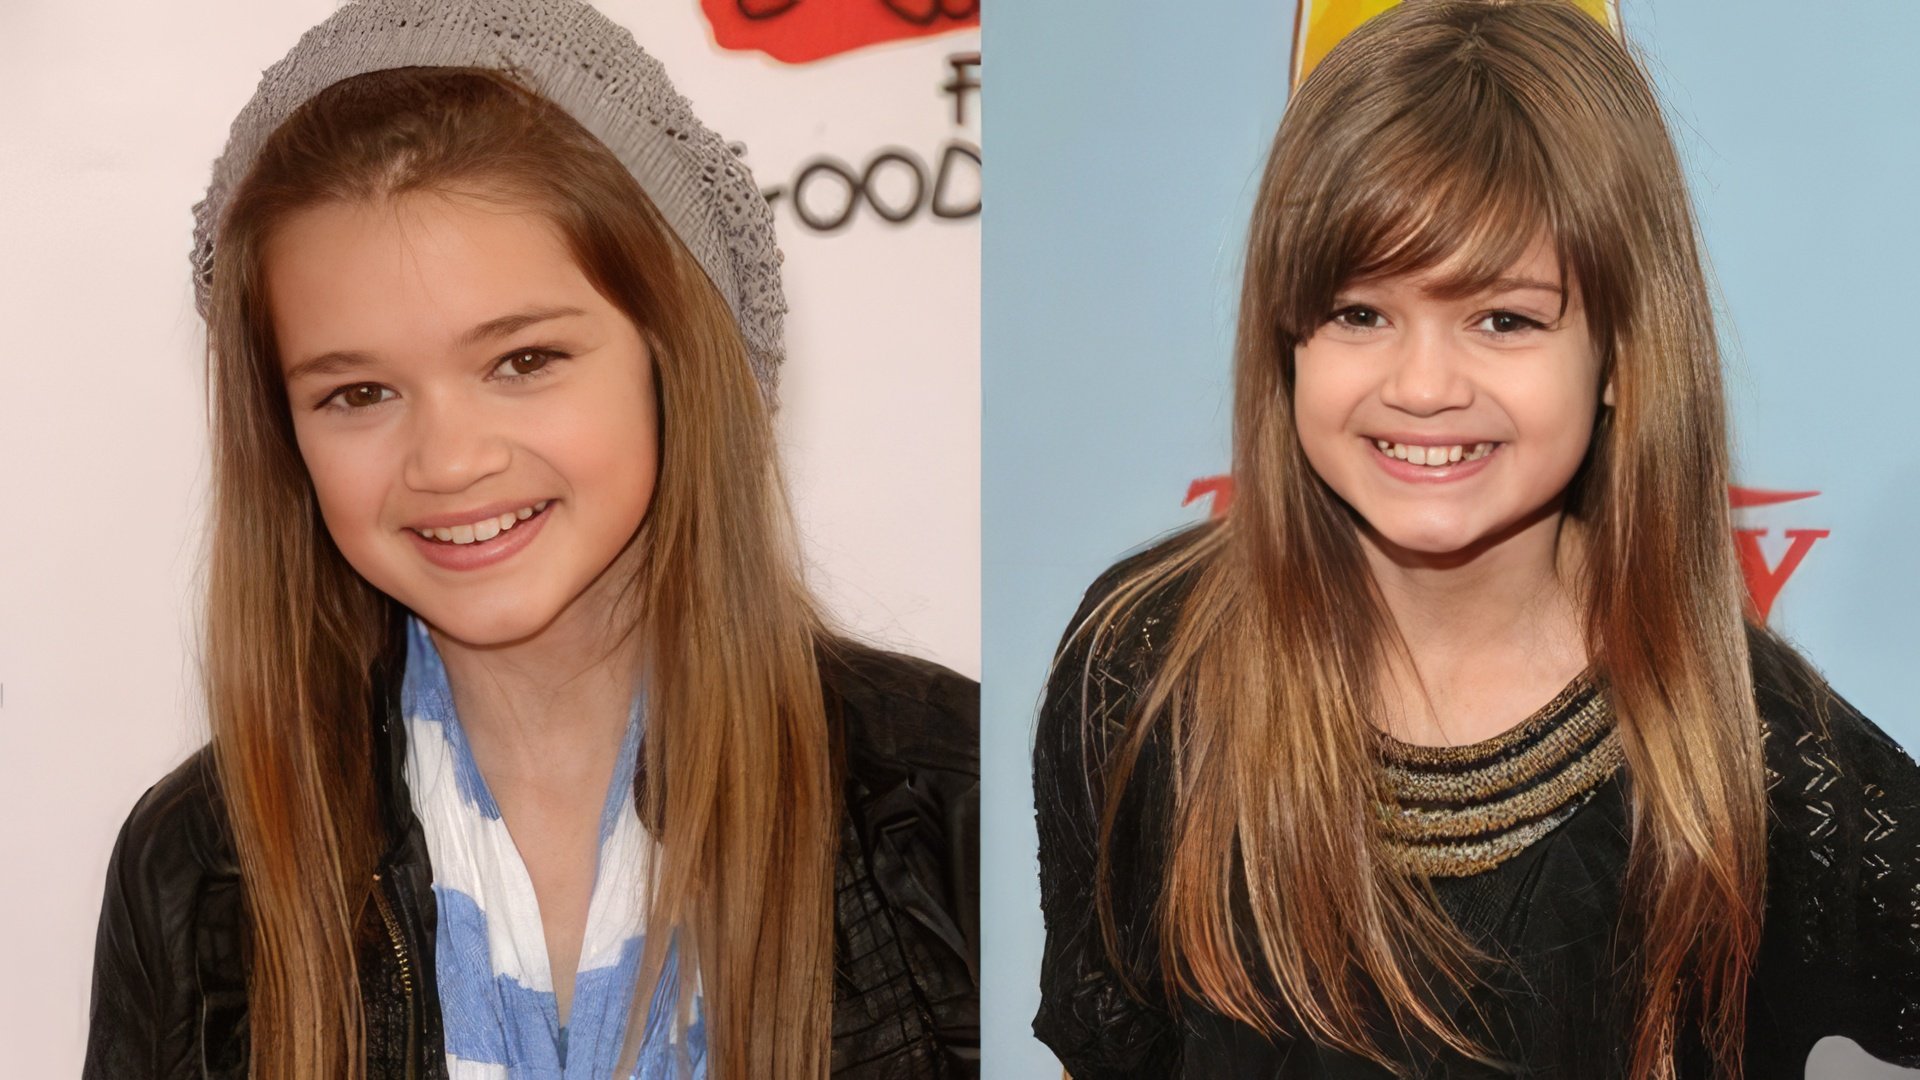 Ciara Bravo's career started at a young age